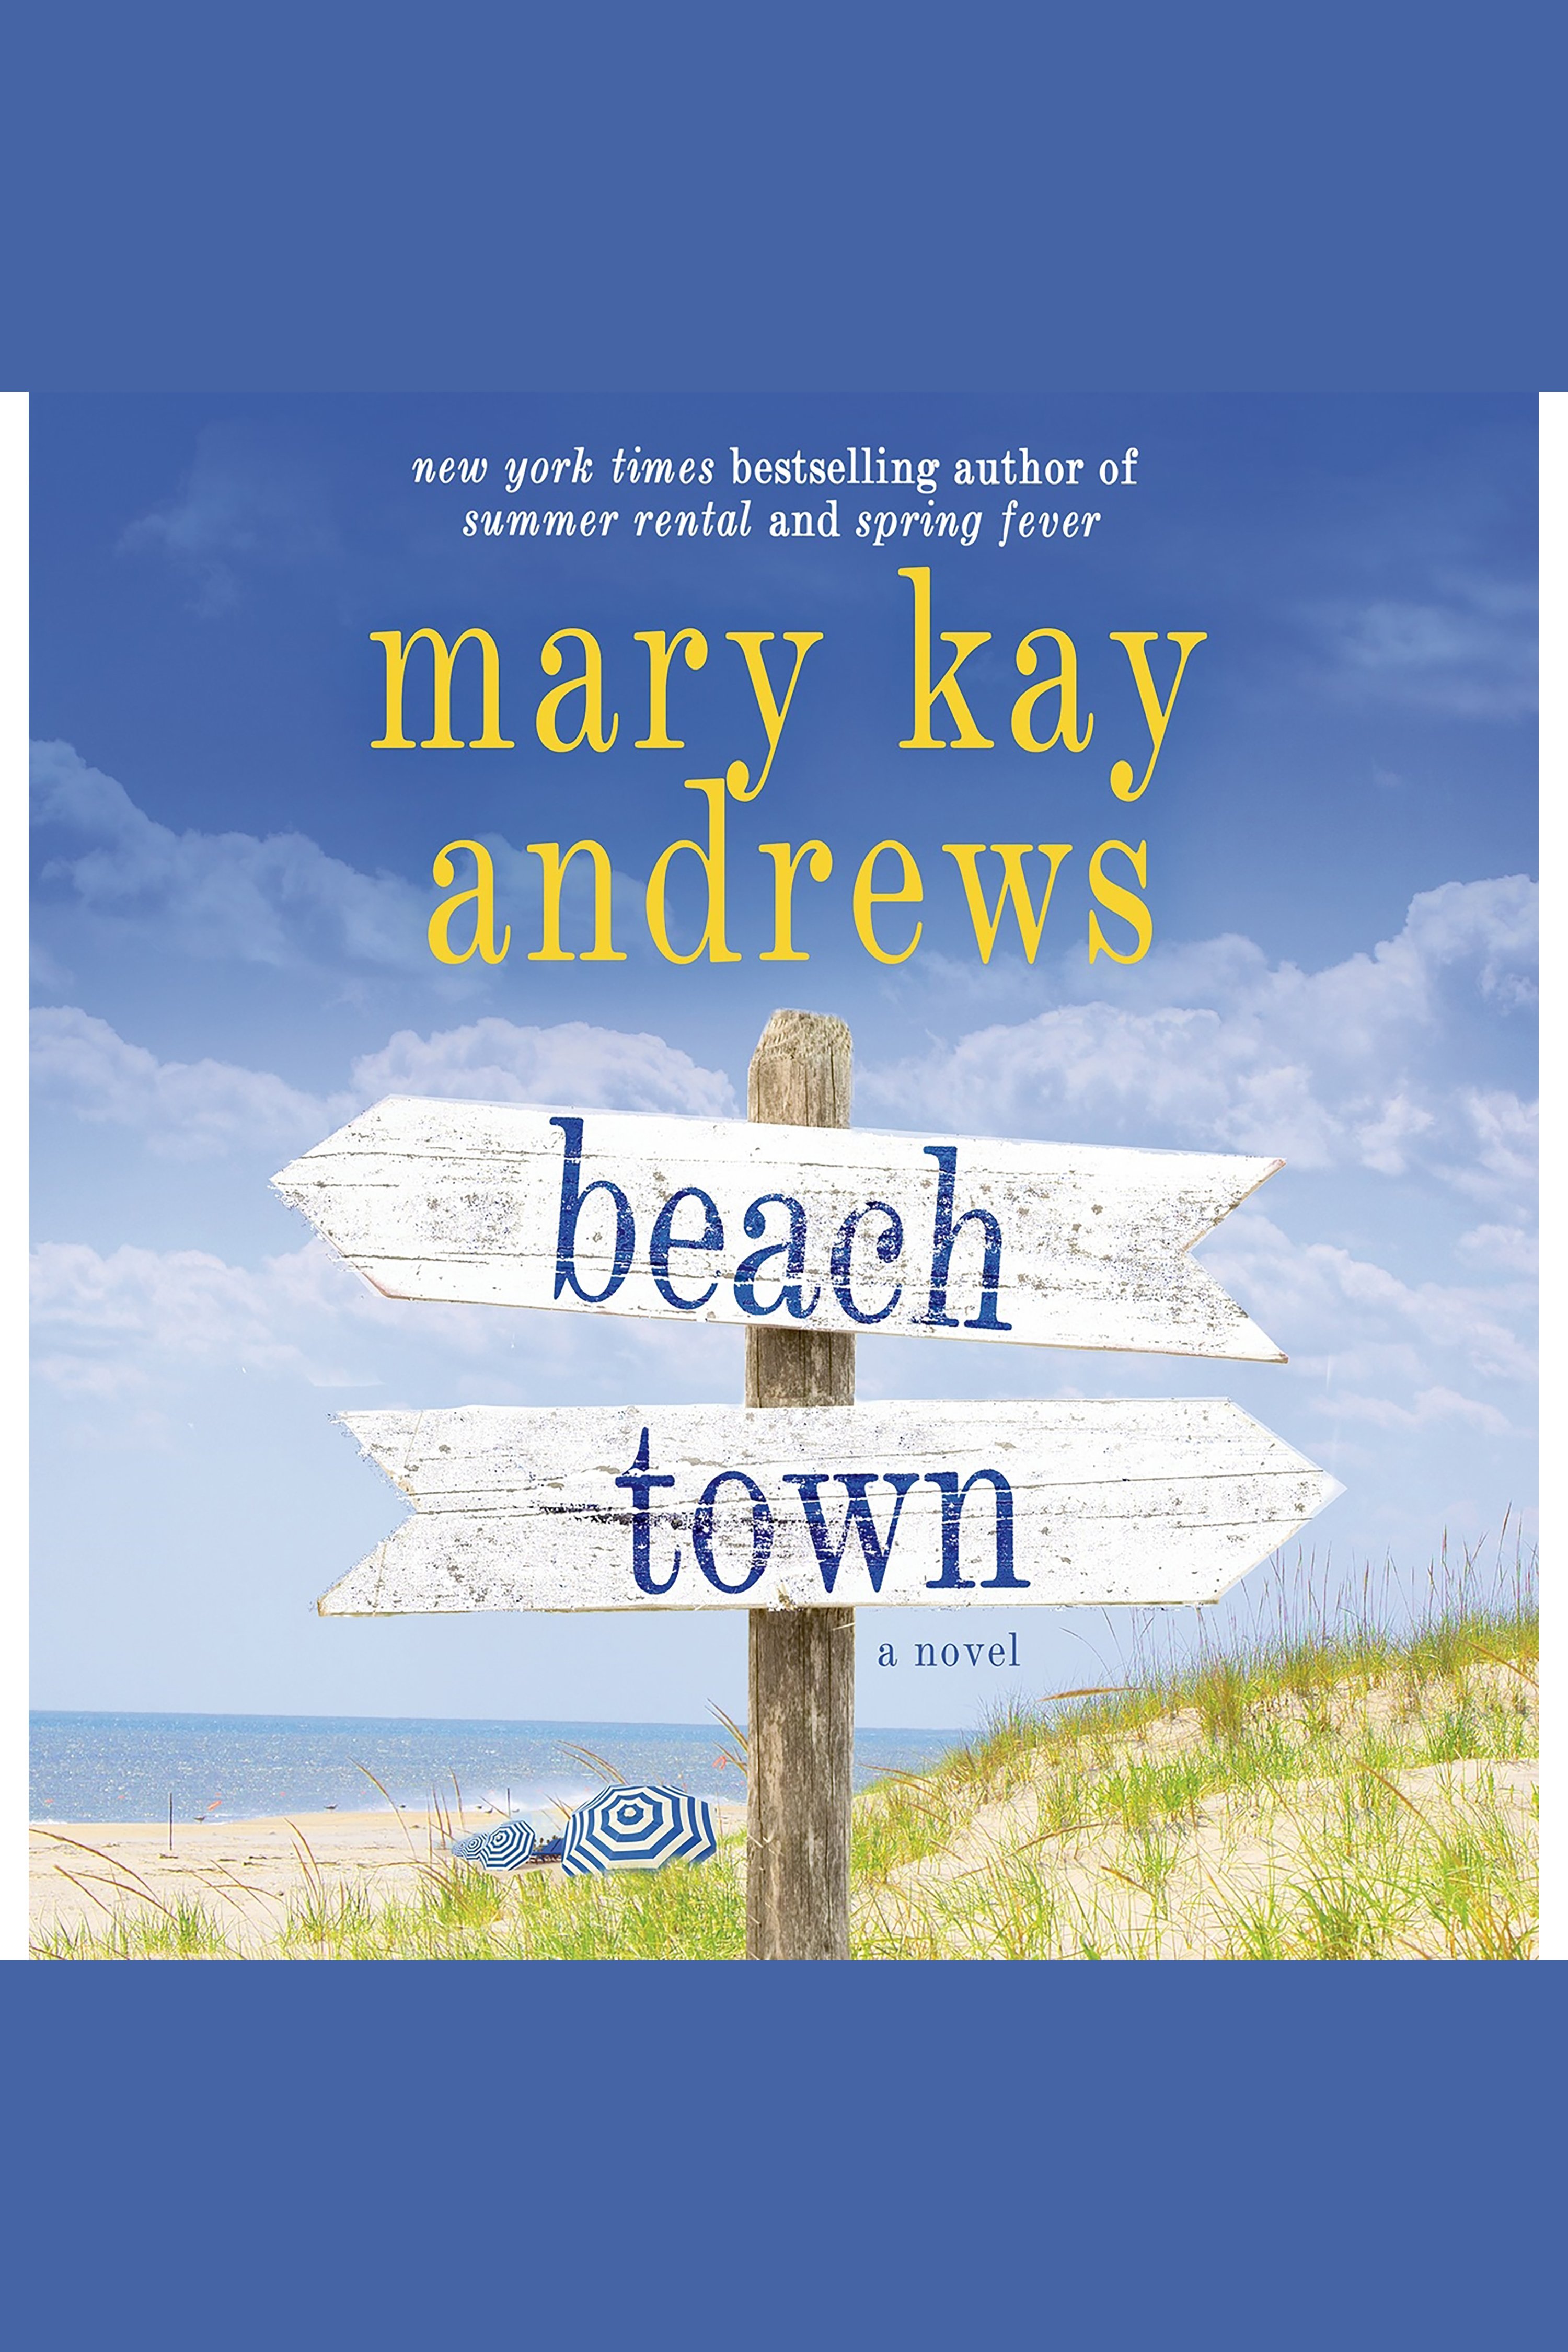 Beach town cover image